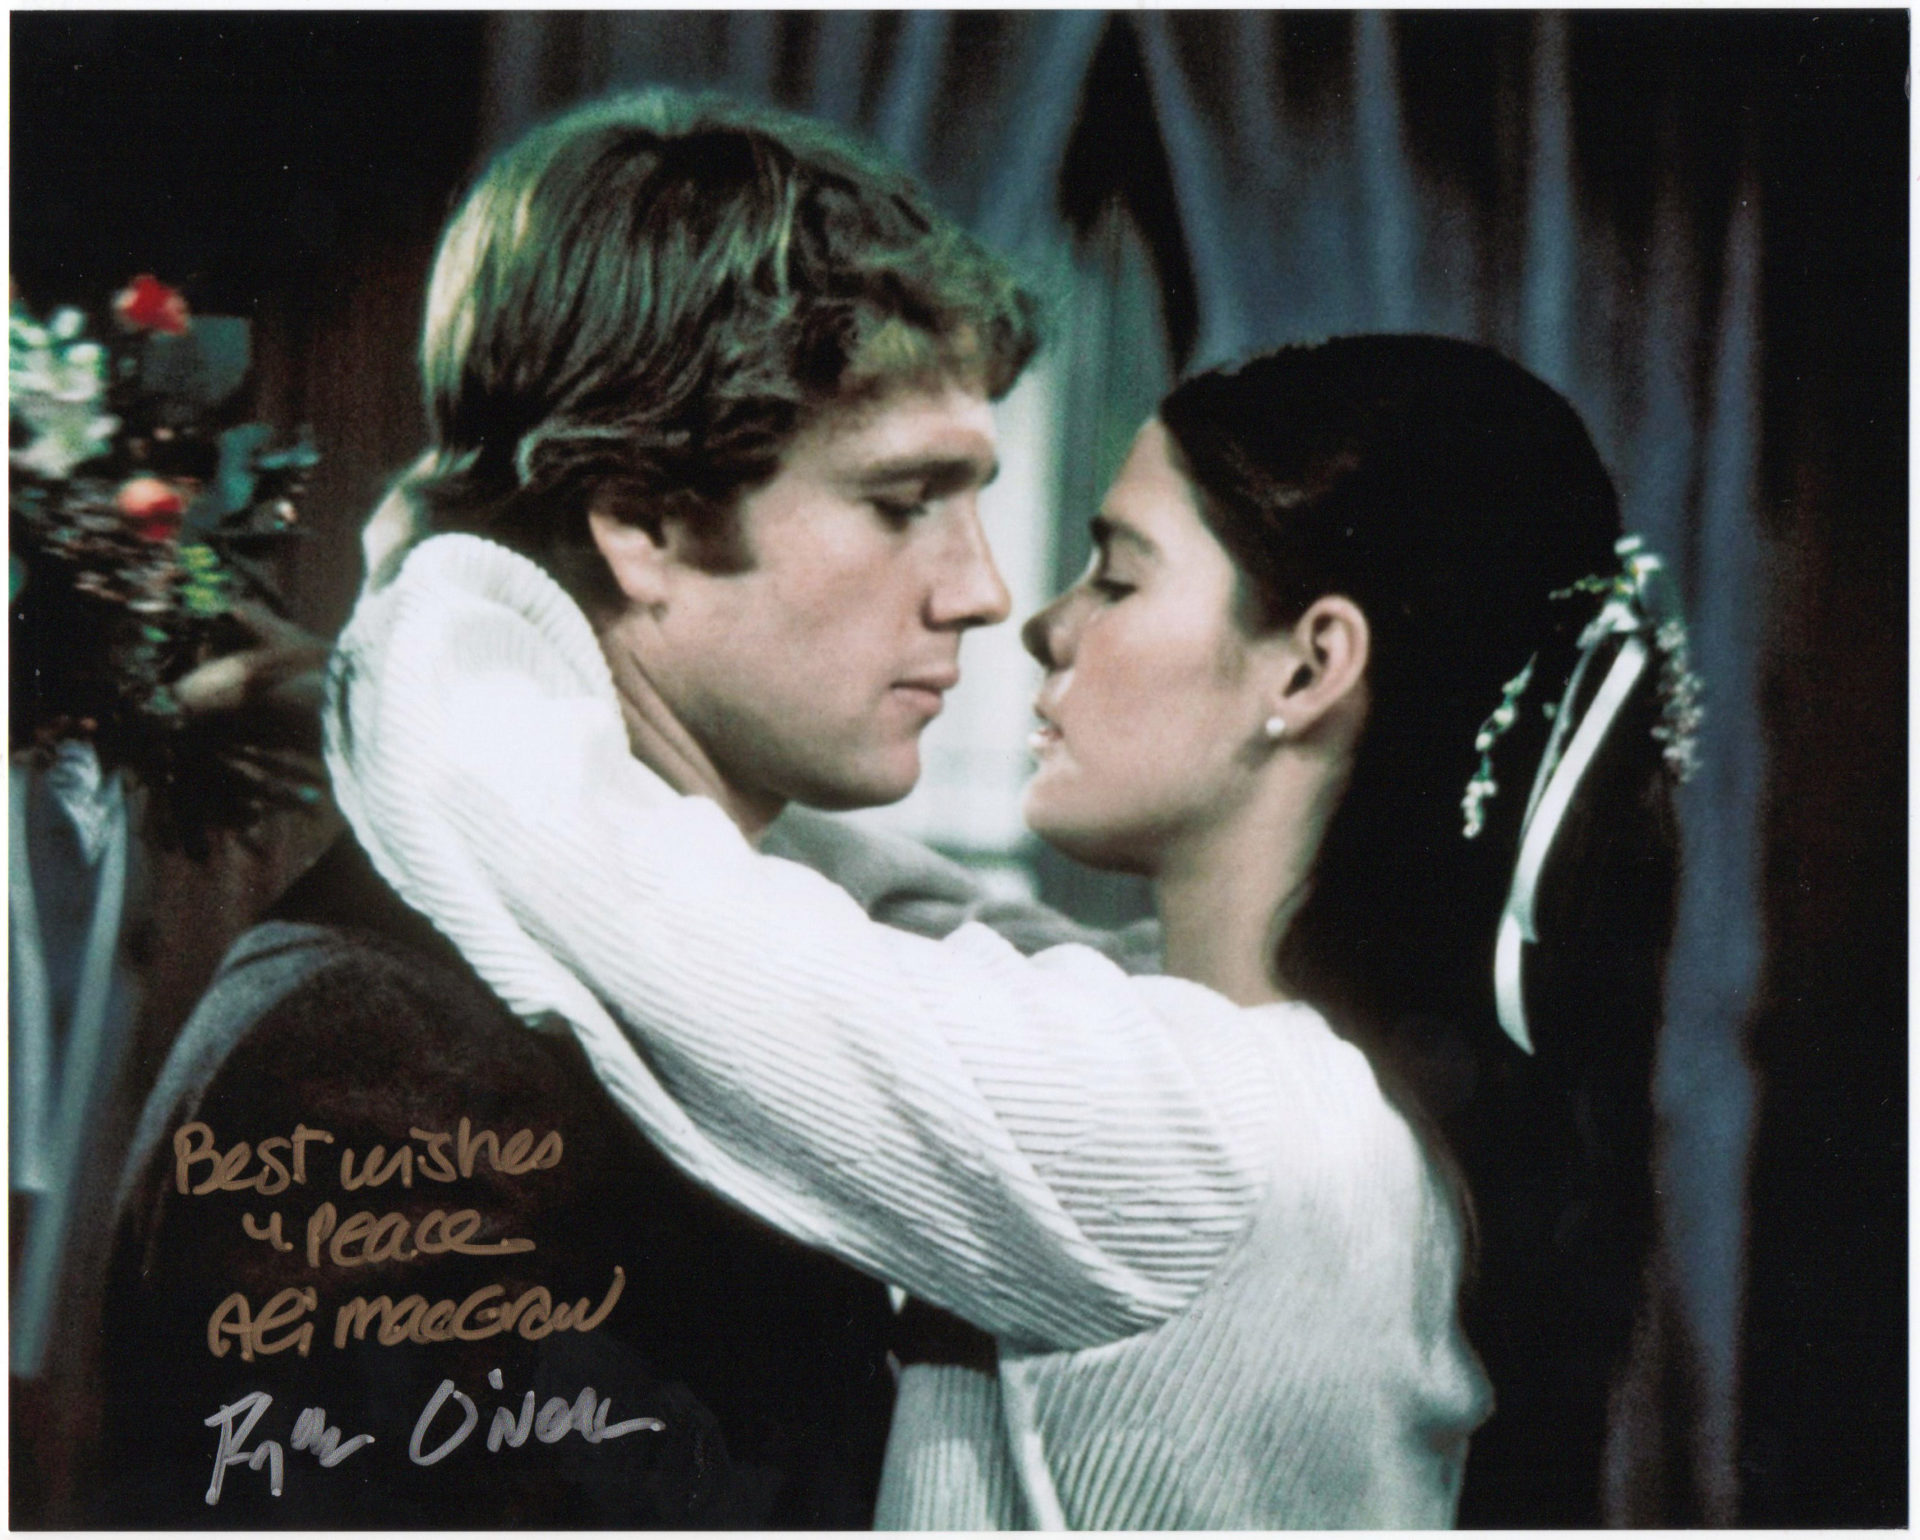 Ryan ONeal and Ali MacGraw – Signed Photo